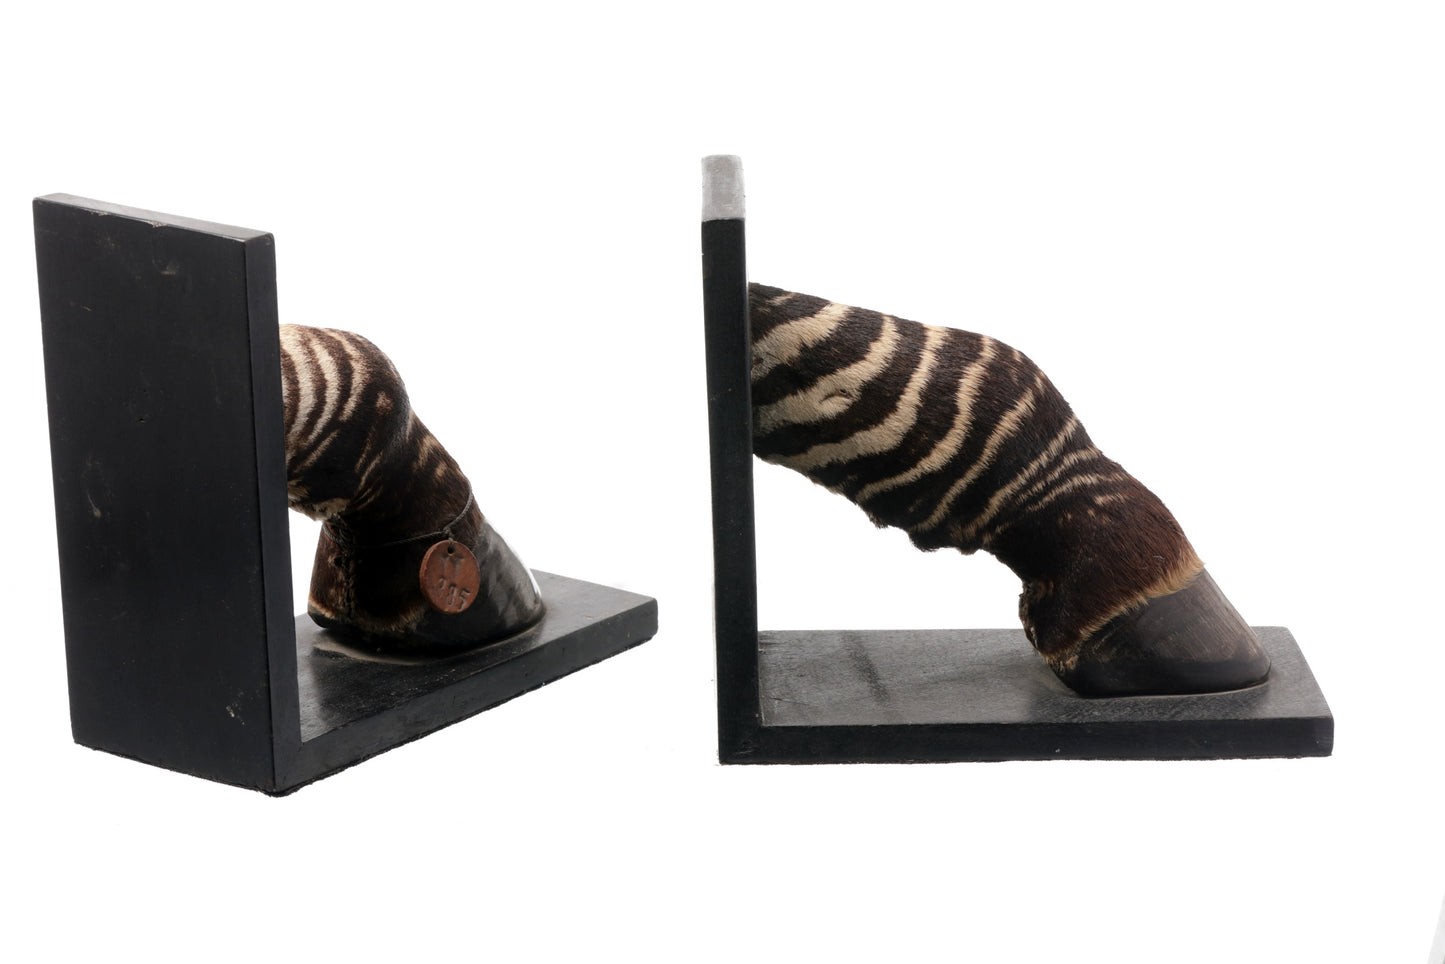 Pair of zebra bookends from the 70s